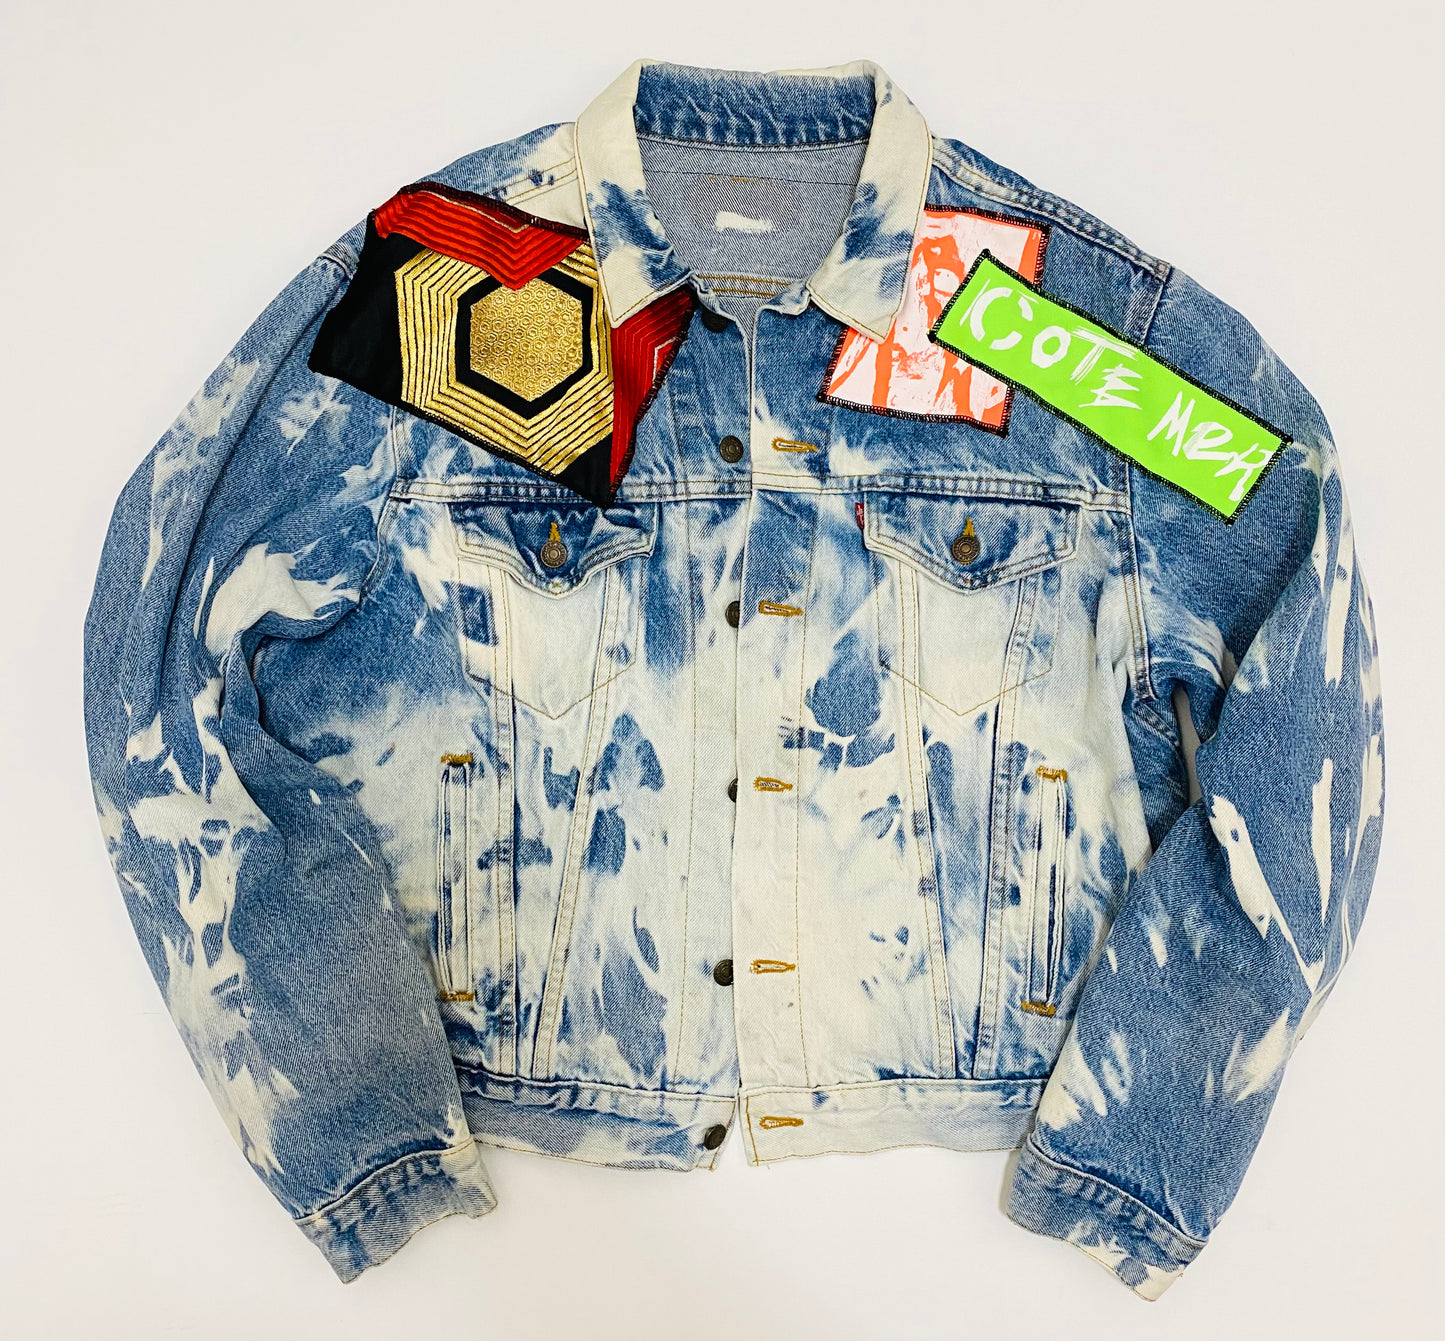 "Metallica" Bespoke Hypebeast Japanese Japan Vintage Beached Levi's Blue Handmade Custom One and Only One Cote Mer Upcycle Street Fashion Embroidered Embroidery Kimono Obi Boro Style Band Rap Tee T Shirt Patchwork Remake Denim Jacket ( Size : L - XL )